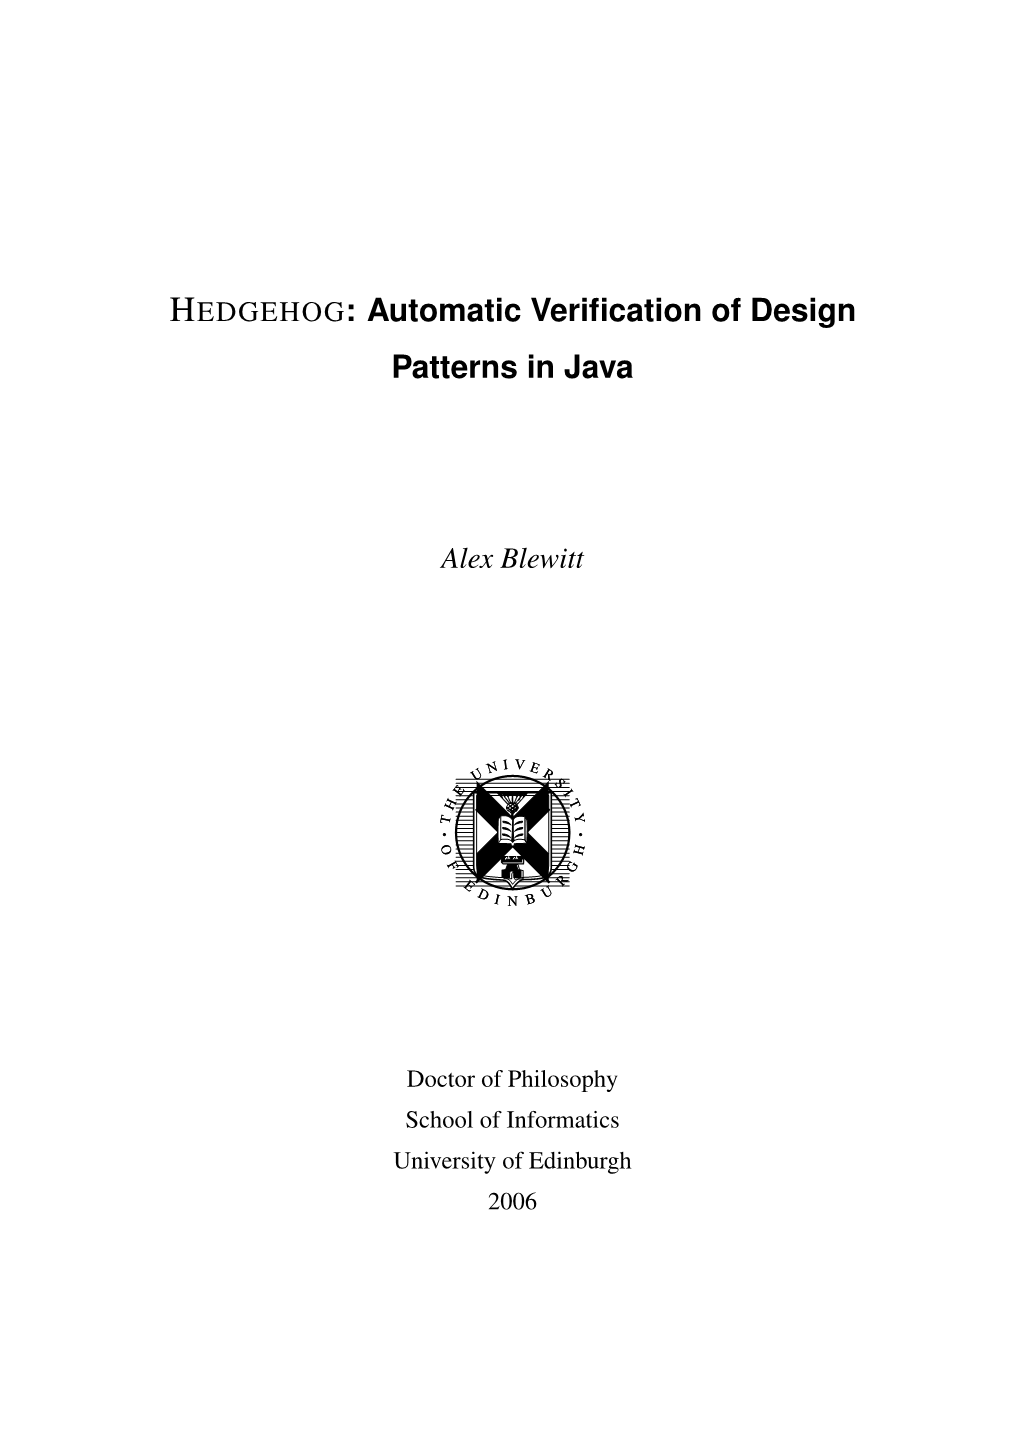 HEDGEHOG: Automatic Veriﬁcation of Design Patterns in Java